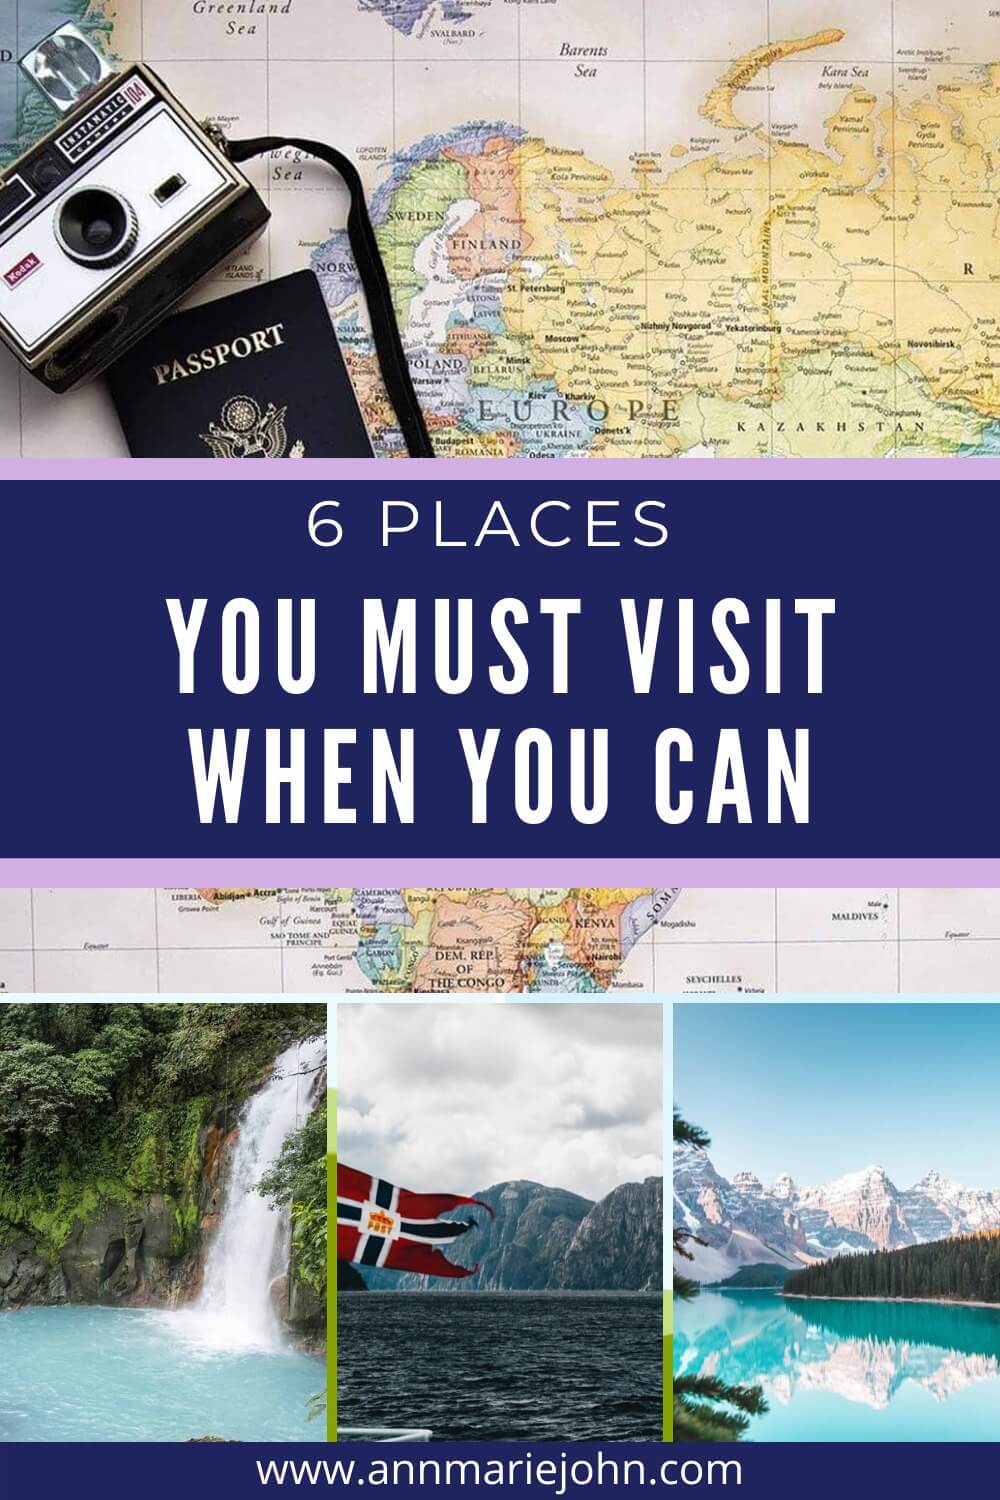 6 Places You Must Visit When You Can